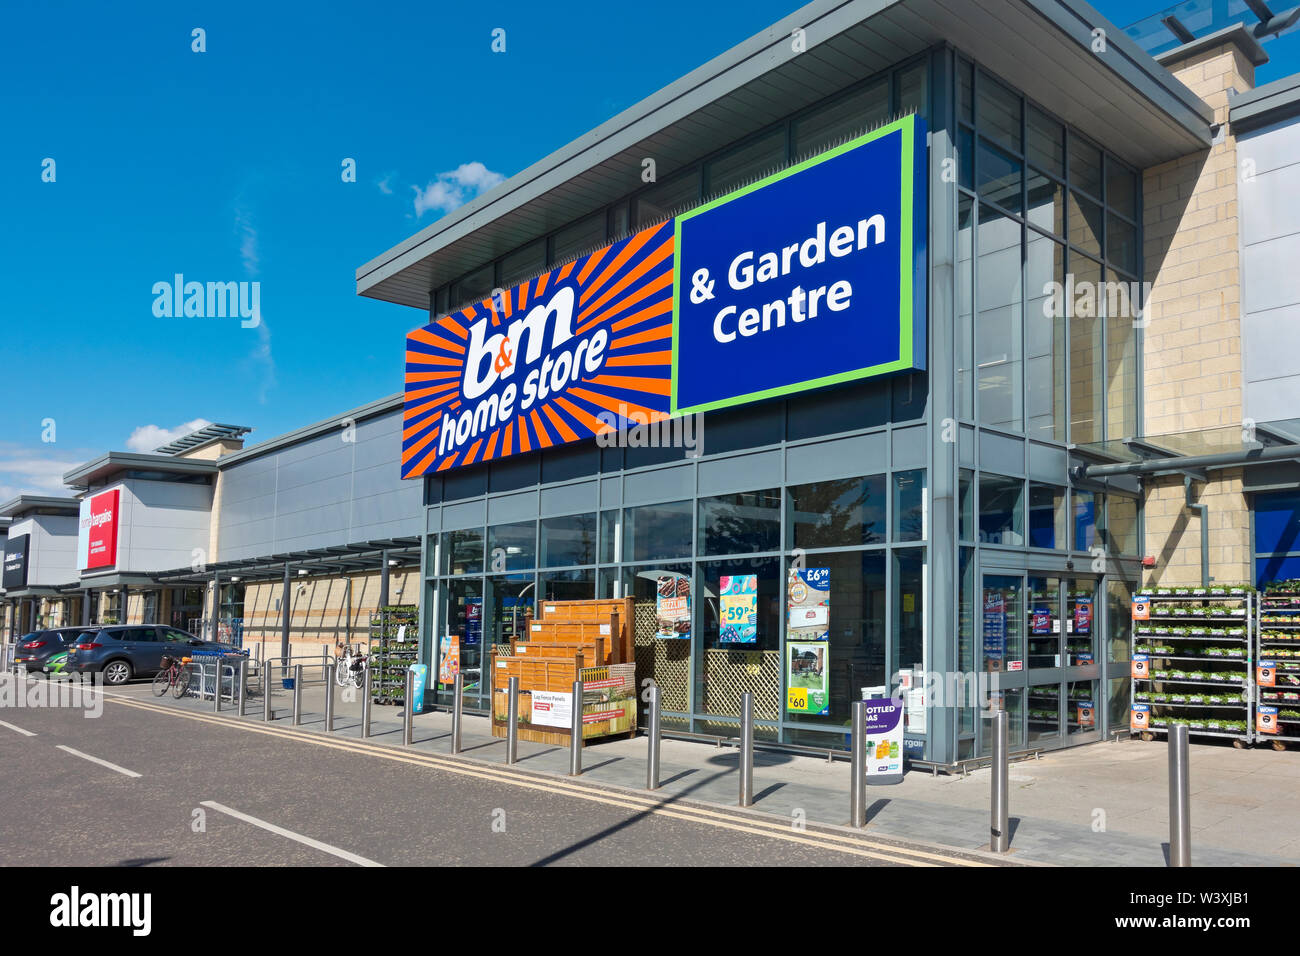 B&M Home Convenience Store and Garden Centre Shop Foss Islands York North Yorkshire England UK United Kingdom GB Great Britain Stock Photo